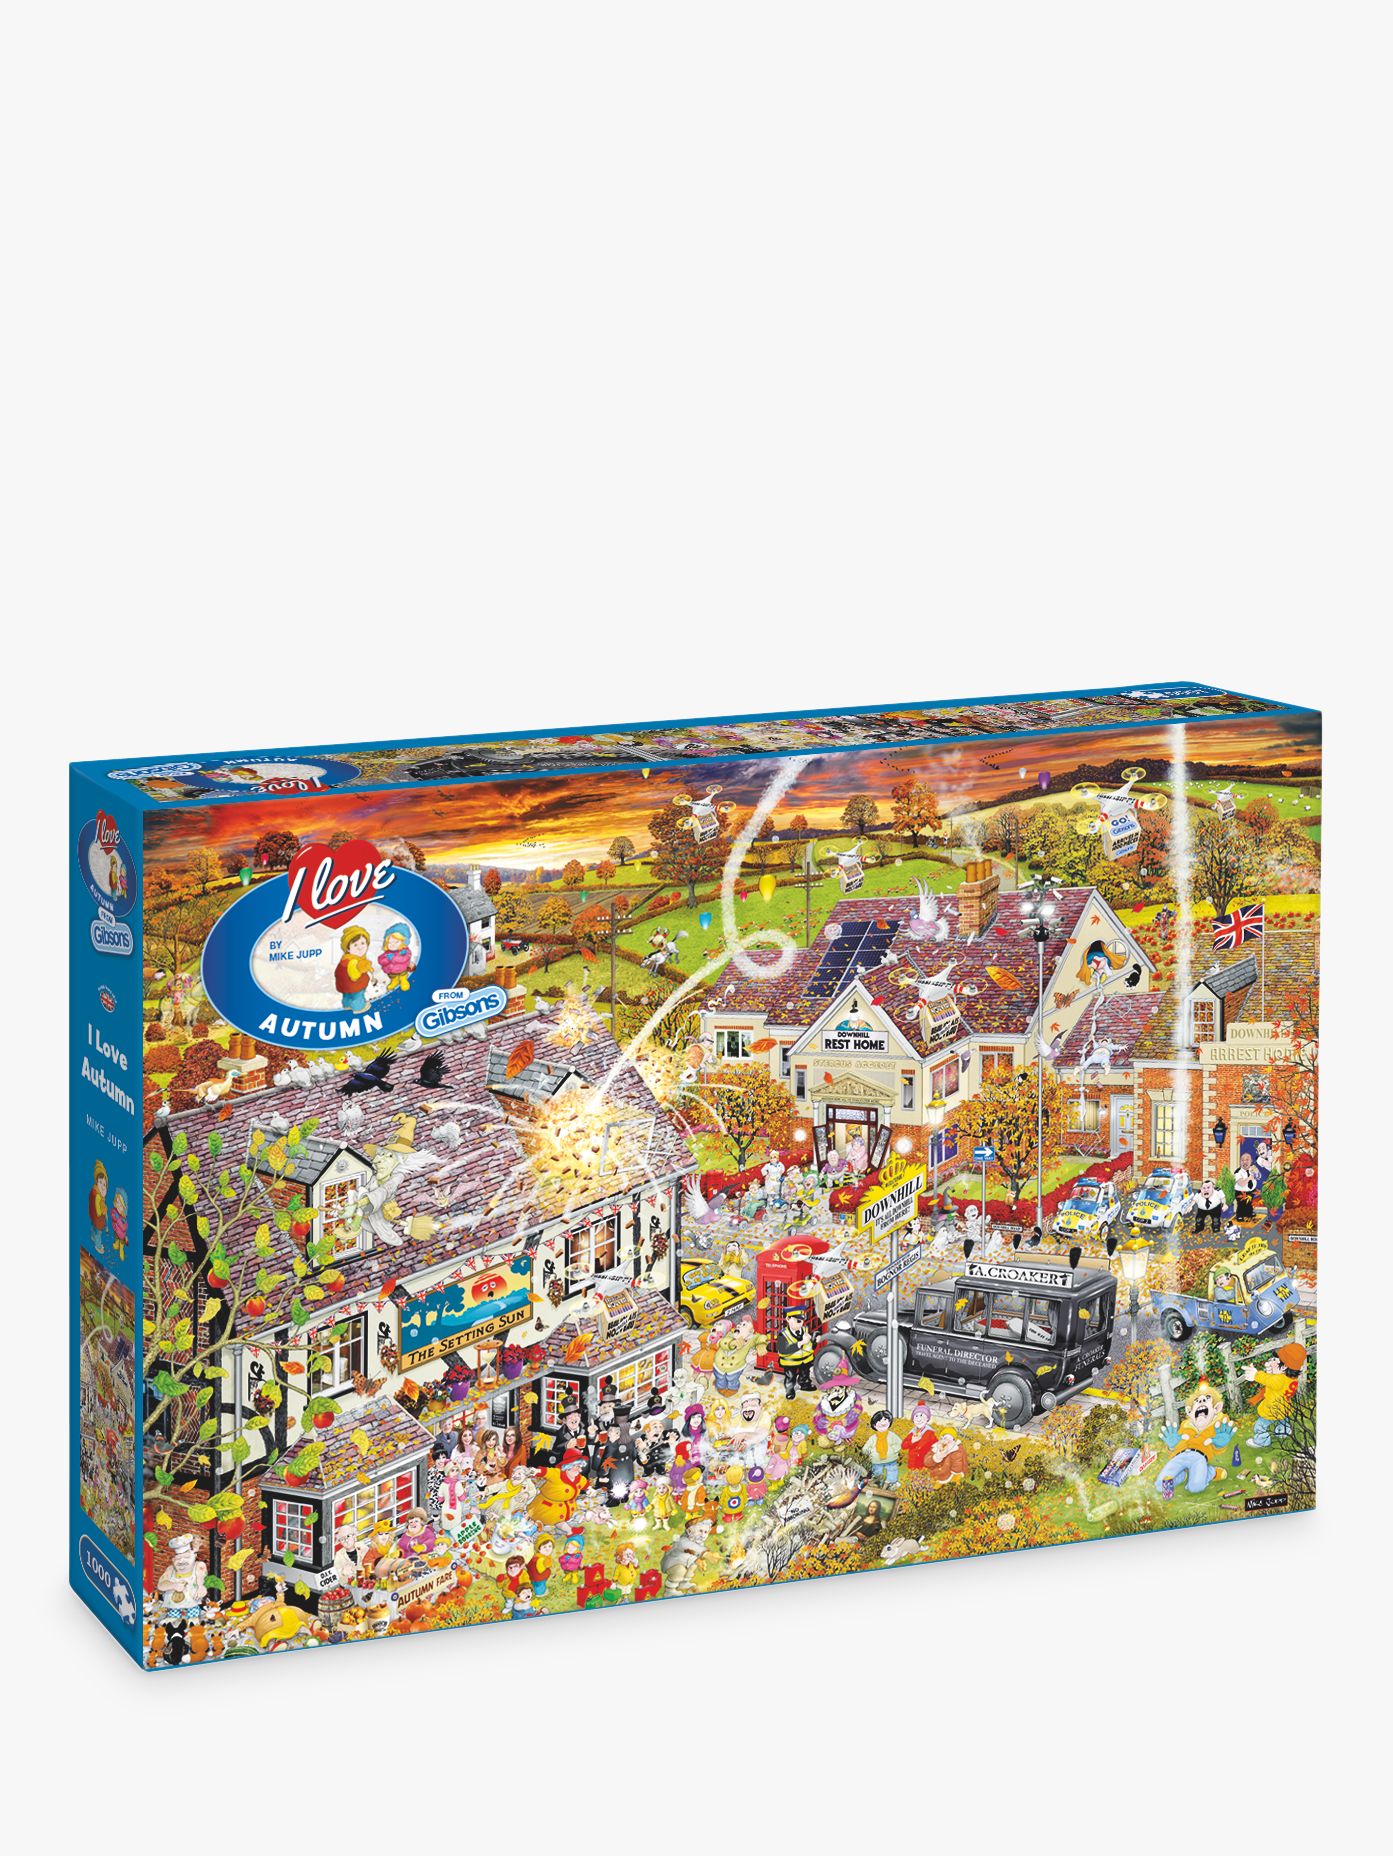 Gibsons I LOVE printemps Jigsaw Puzzle 1000 pièces 